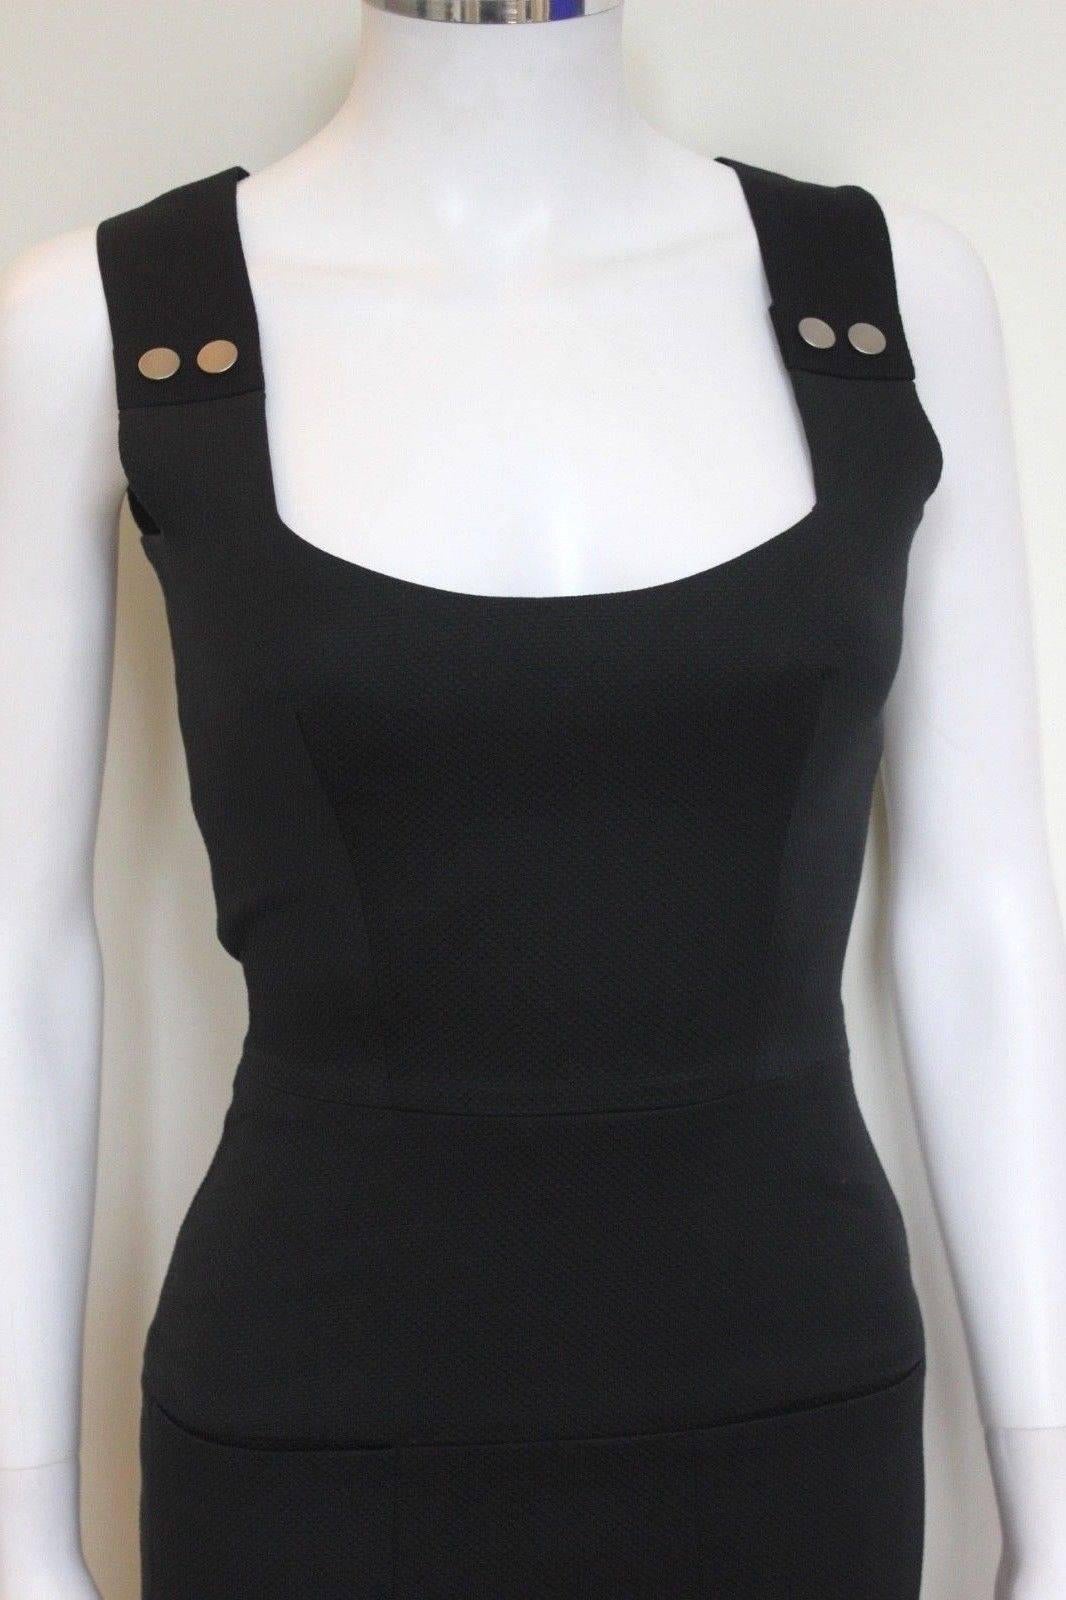 VICTORIA BECKHAM Basket Weave Black Dress uk 8 
Figger hugging dress with textured fabric 
Silver studs to the shoulder straps 
Slim pocket tot the hip area as ass in the 7th photo, the small mark above the pocket is just dust :)
Exposed zip to the